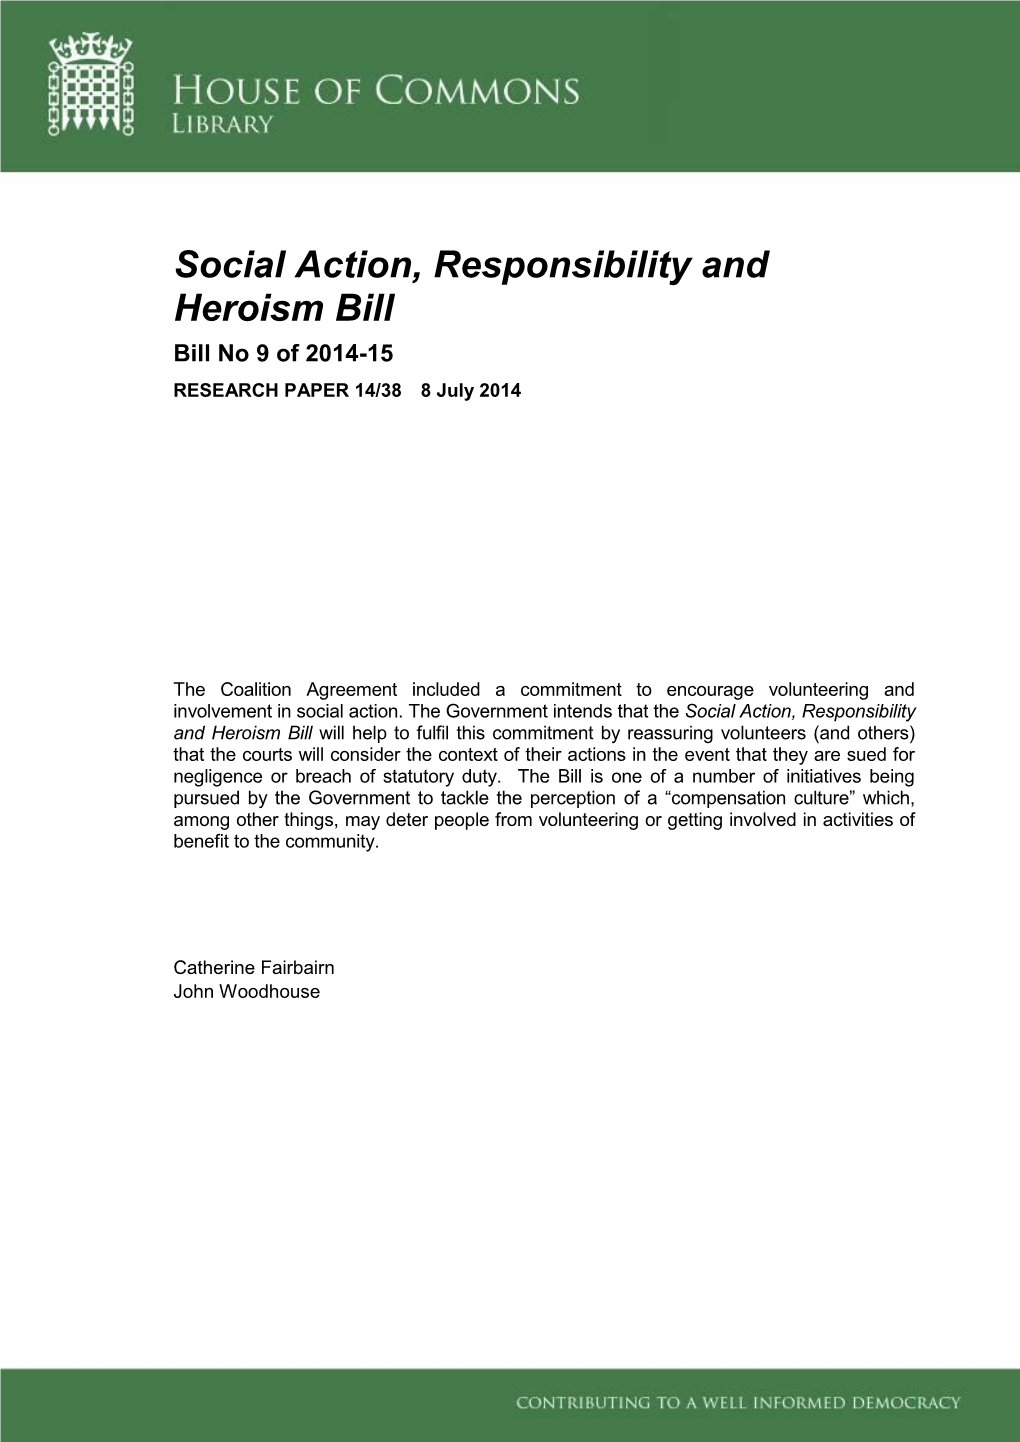 Social Action, Responsibility and Heroism Bill Bill No 9 of 2014-15 RESEARCH PAPER 14/38 8 July 2014